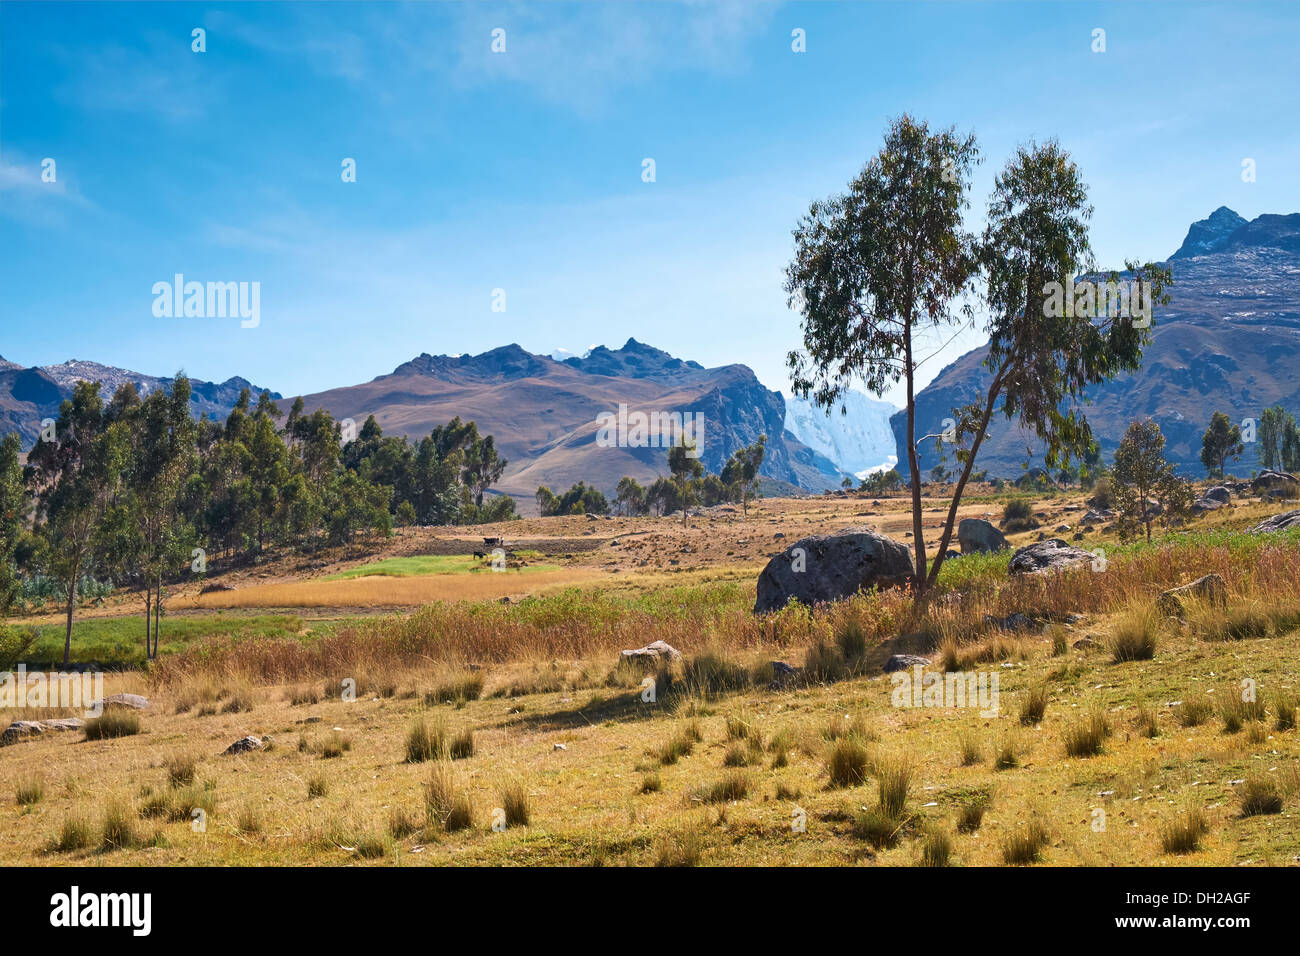 Looking towards Llaca Valley and Ocshapalca in the Peruvian Andes, South America. Stock Photo